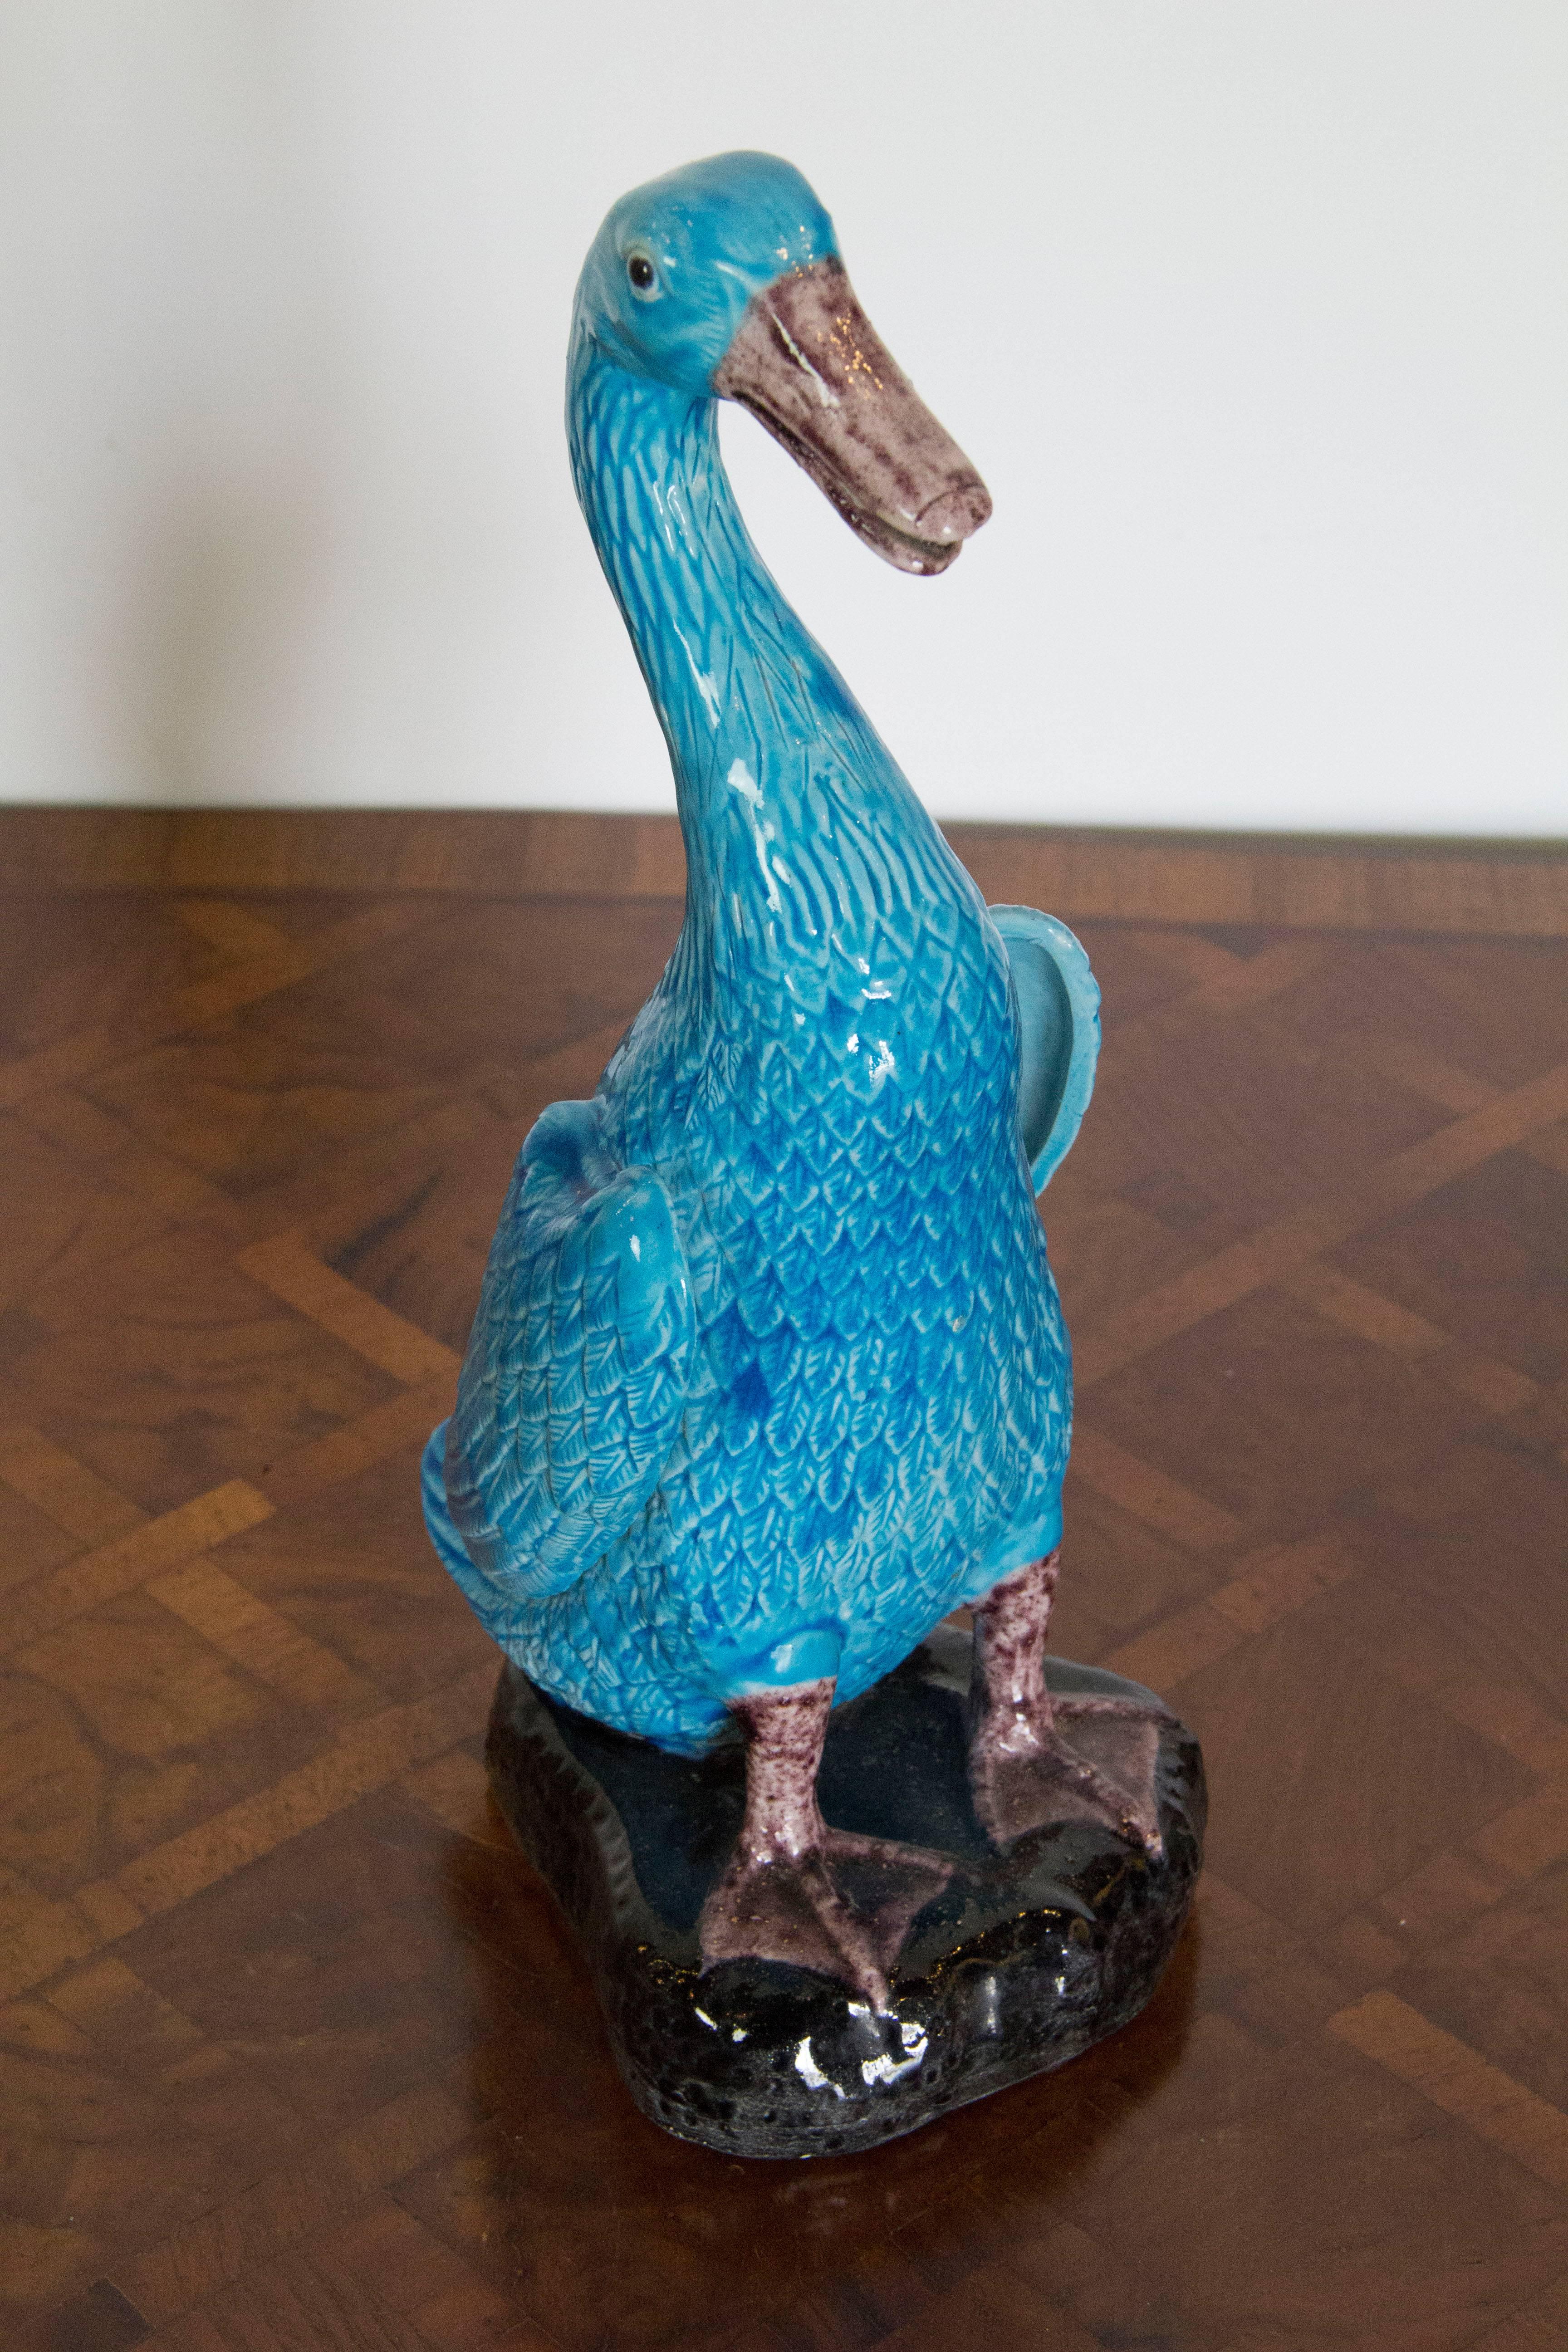 Blue Porcelain Chinese Duck Figure 1